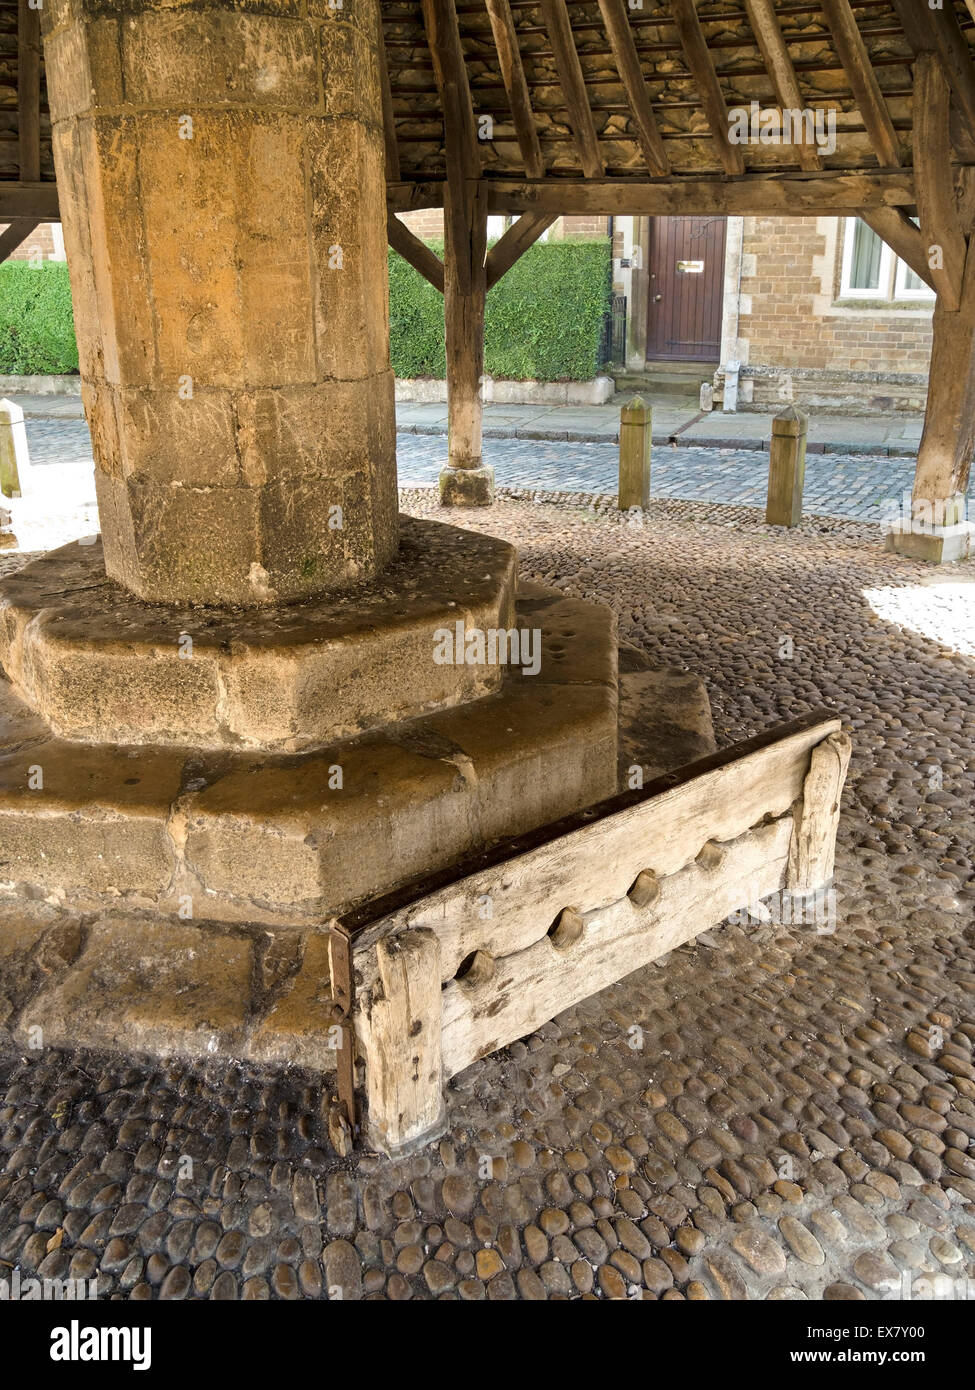 Medieval wooden stocks at the Old Butter Cross, Oakham, Rutland, England, UK. Stock Photo